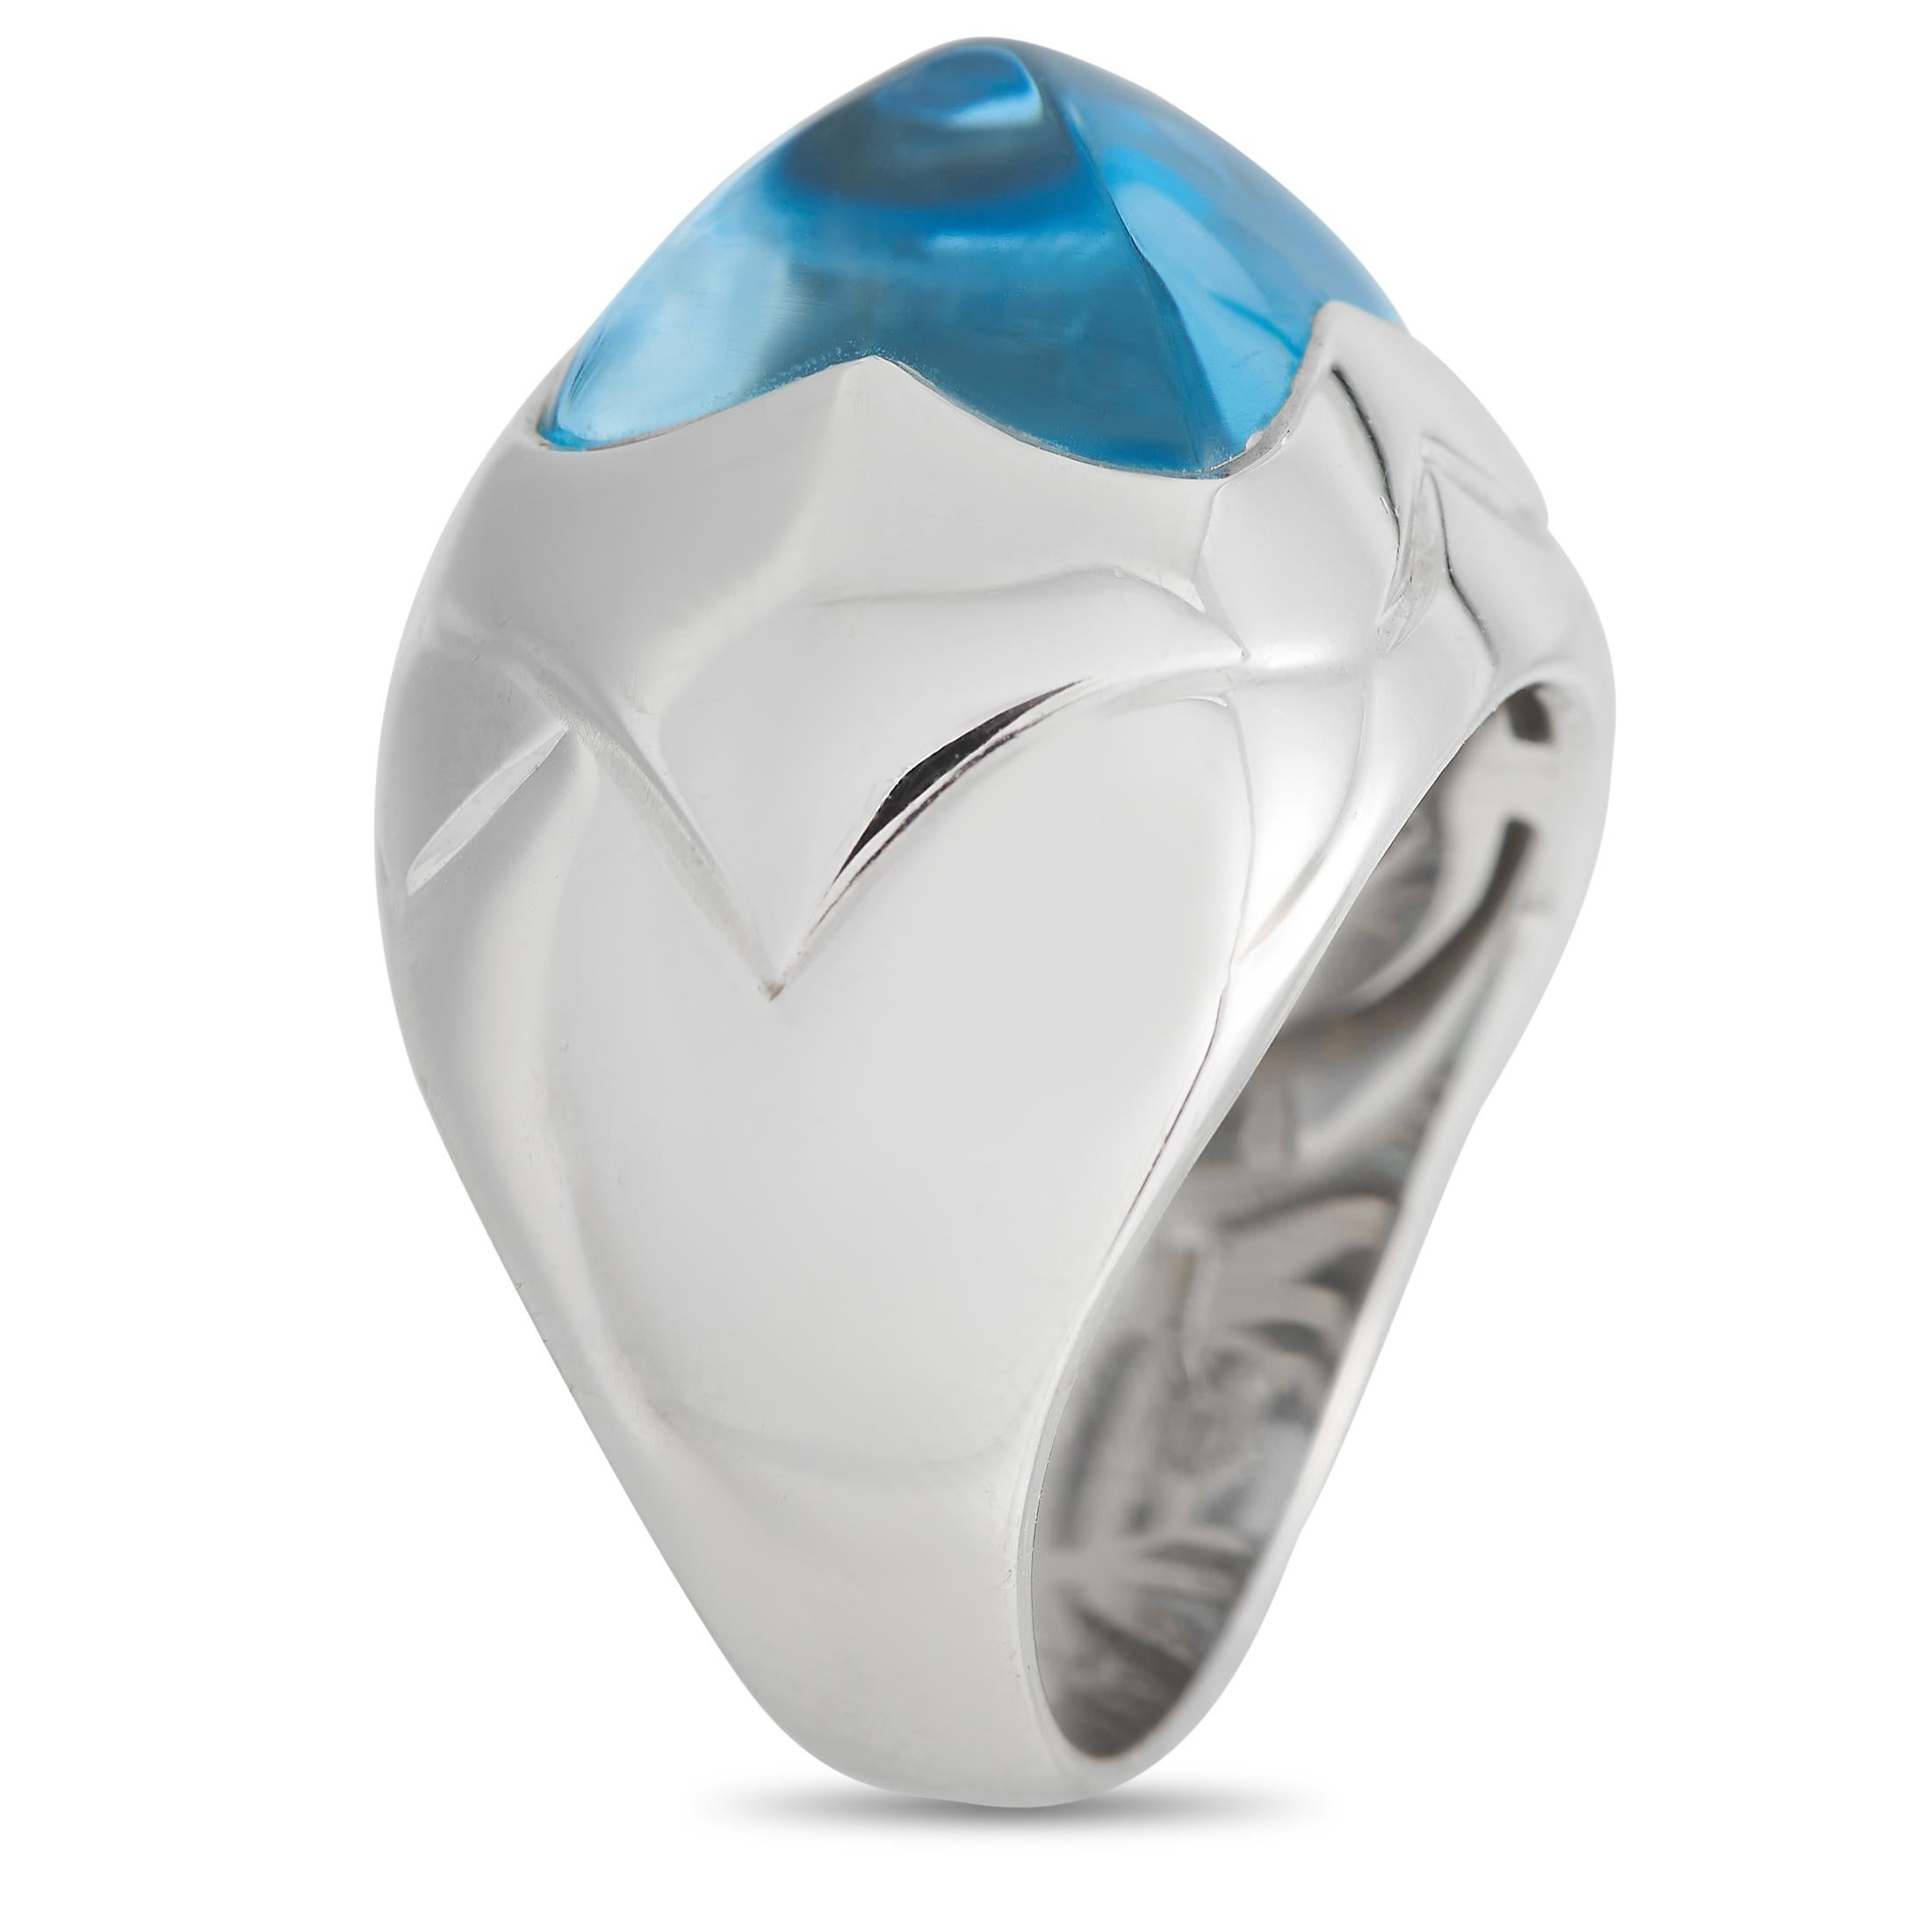 Instantly add a sense of individuality to your style with this Bvlgari ring. It features a 5mm-thick band in 18K white gold topped with a sugarloaf cut topaz that displays a pyramid's conical silhouette. The sky blue gem has no facets and features a